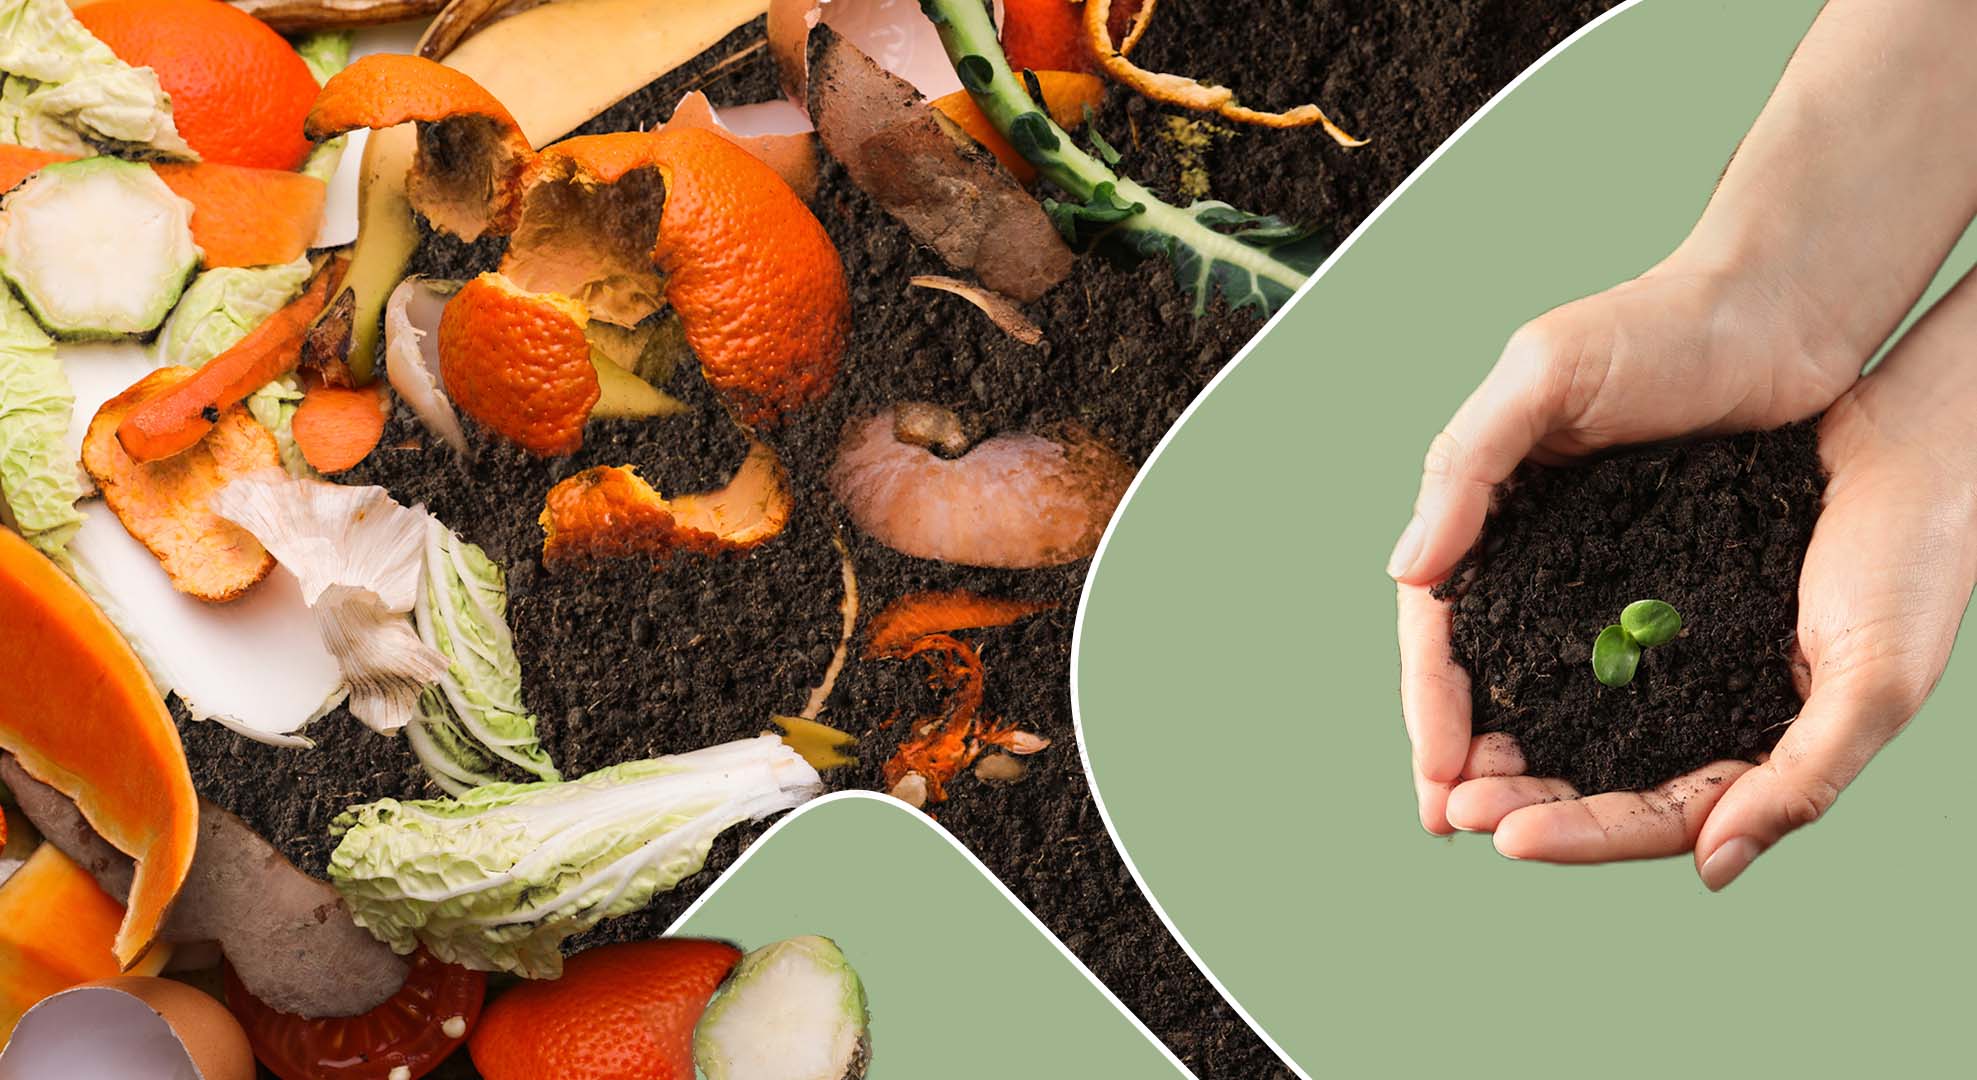 Is Composting Worth It